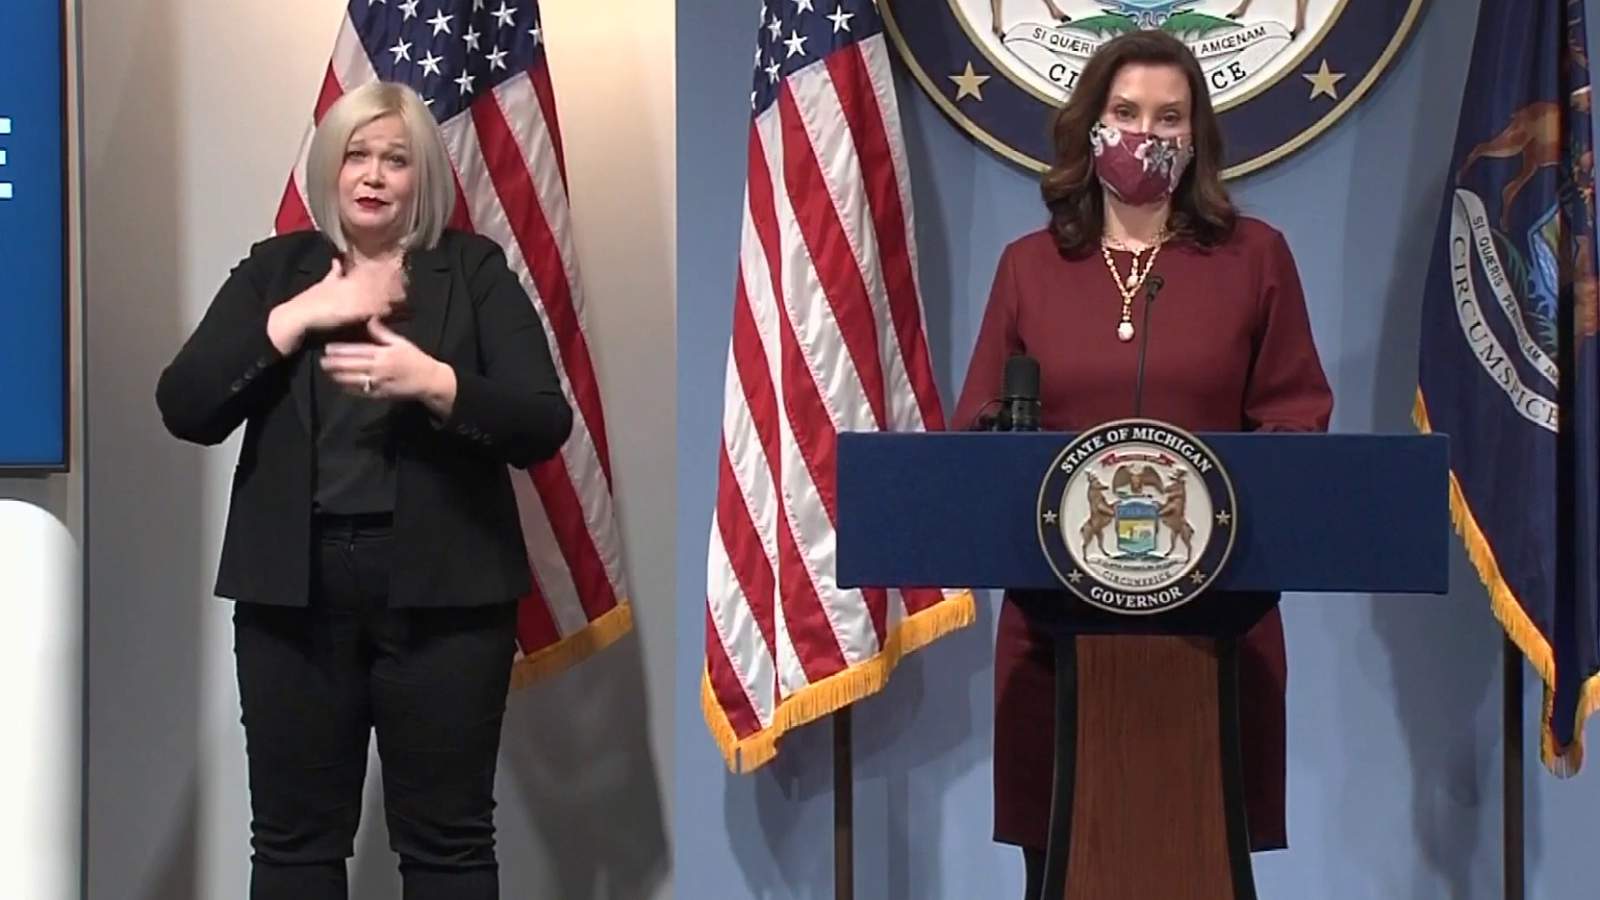 Whitmer on COVID battle with state GOP: ‘I will be judged by the voters when I’m up for reelection’